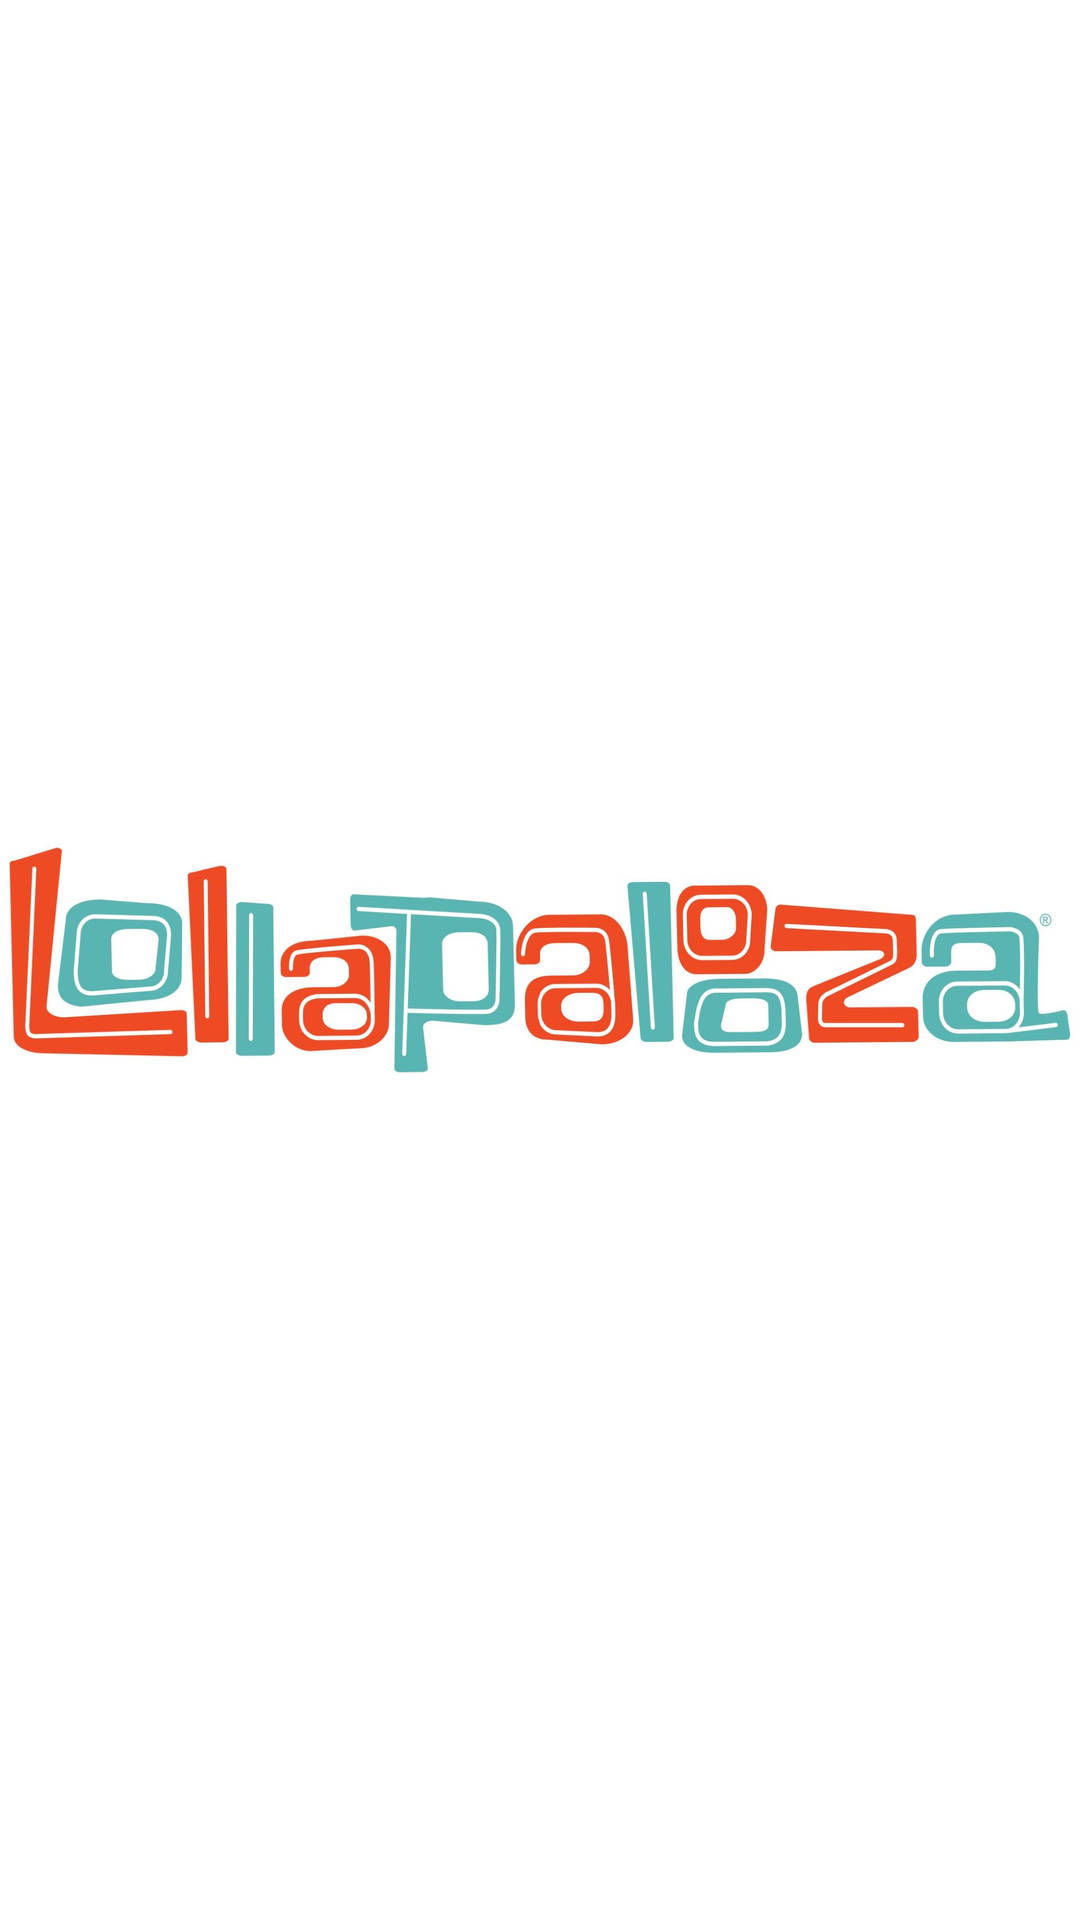 Get Ready To Make Memories At Lollapalooza! Background